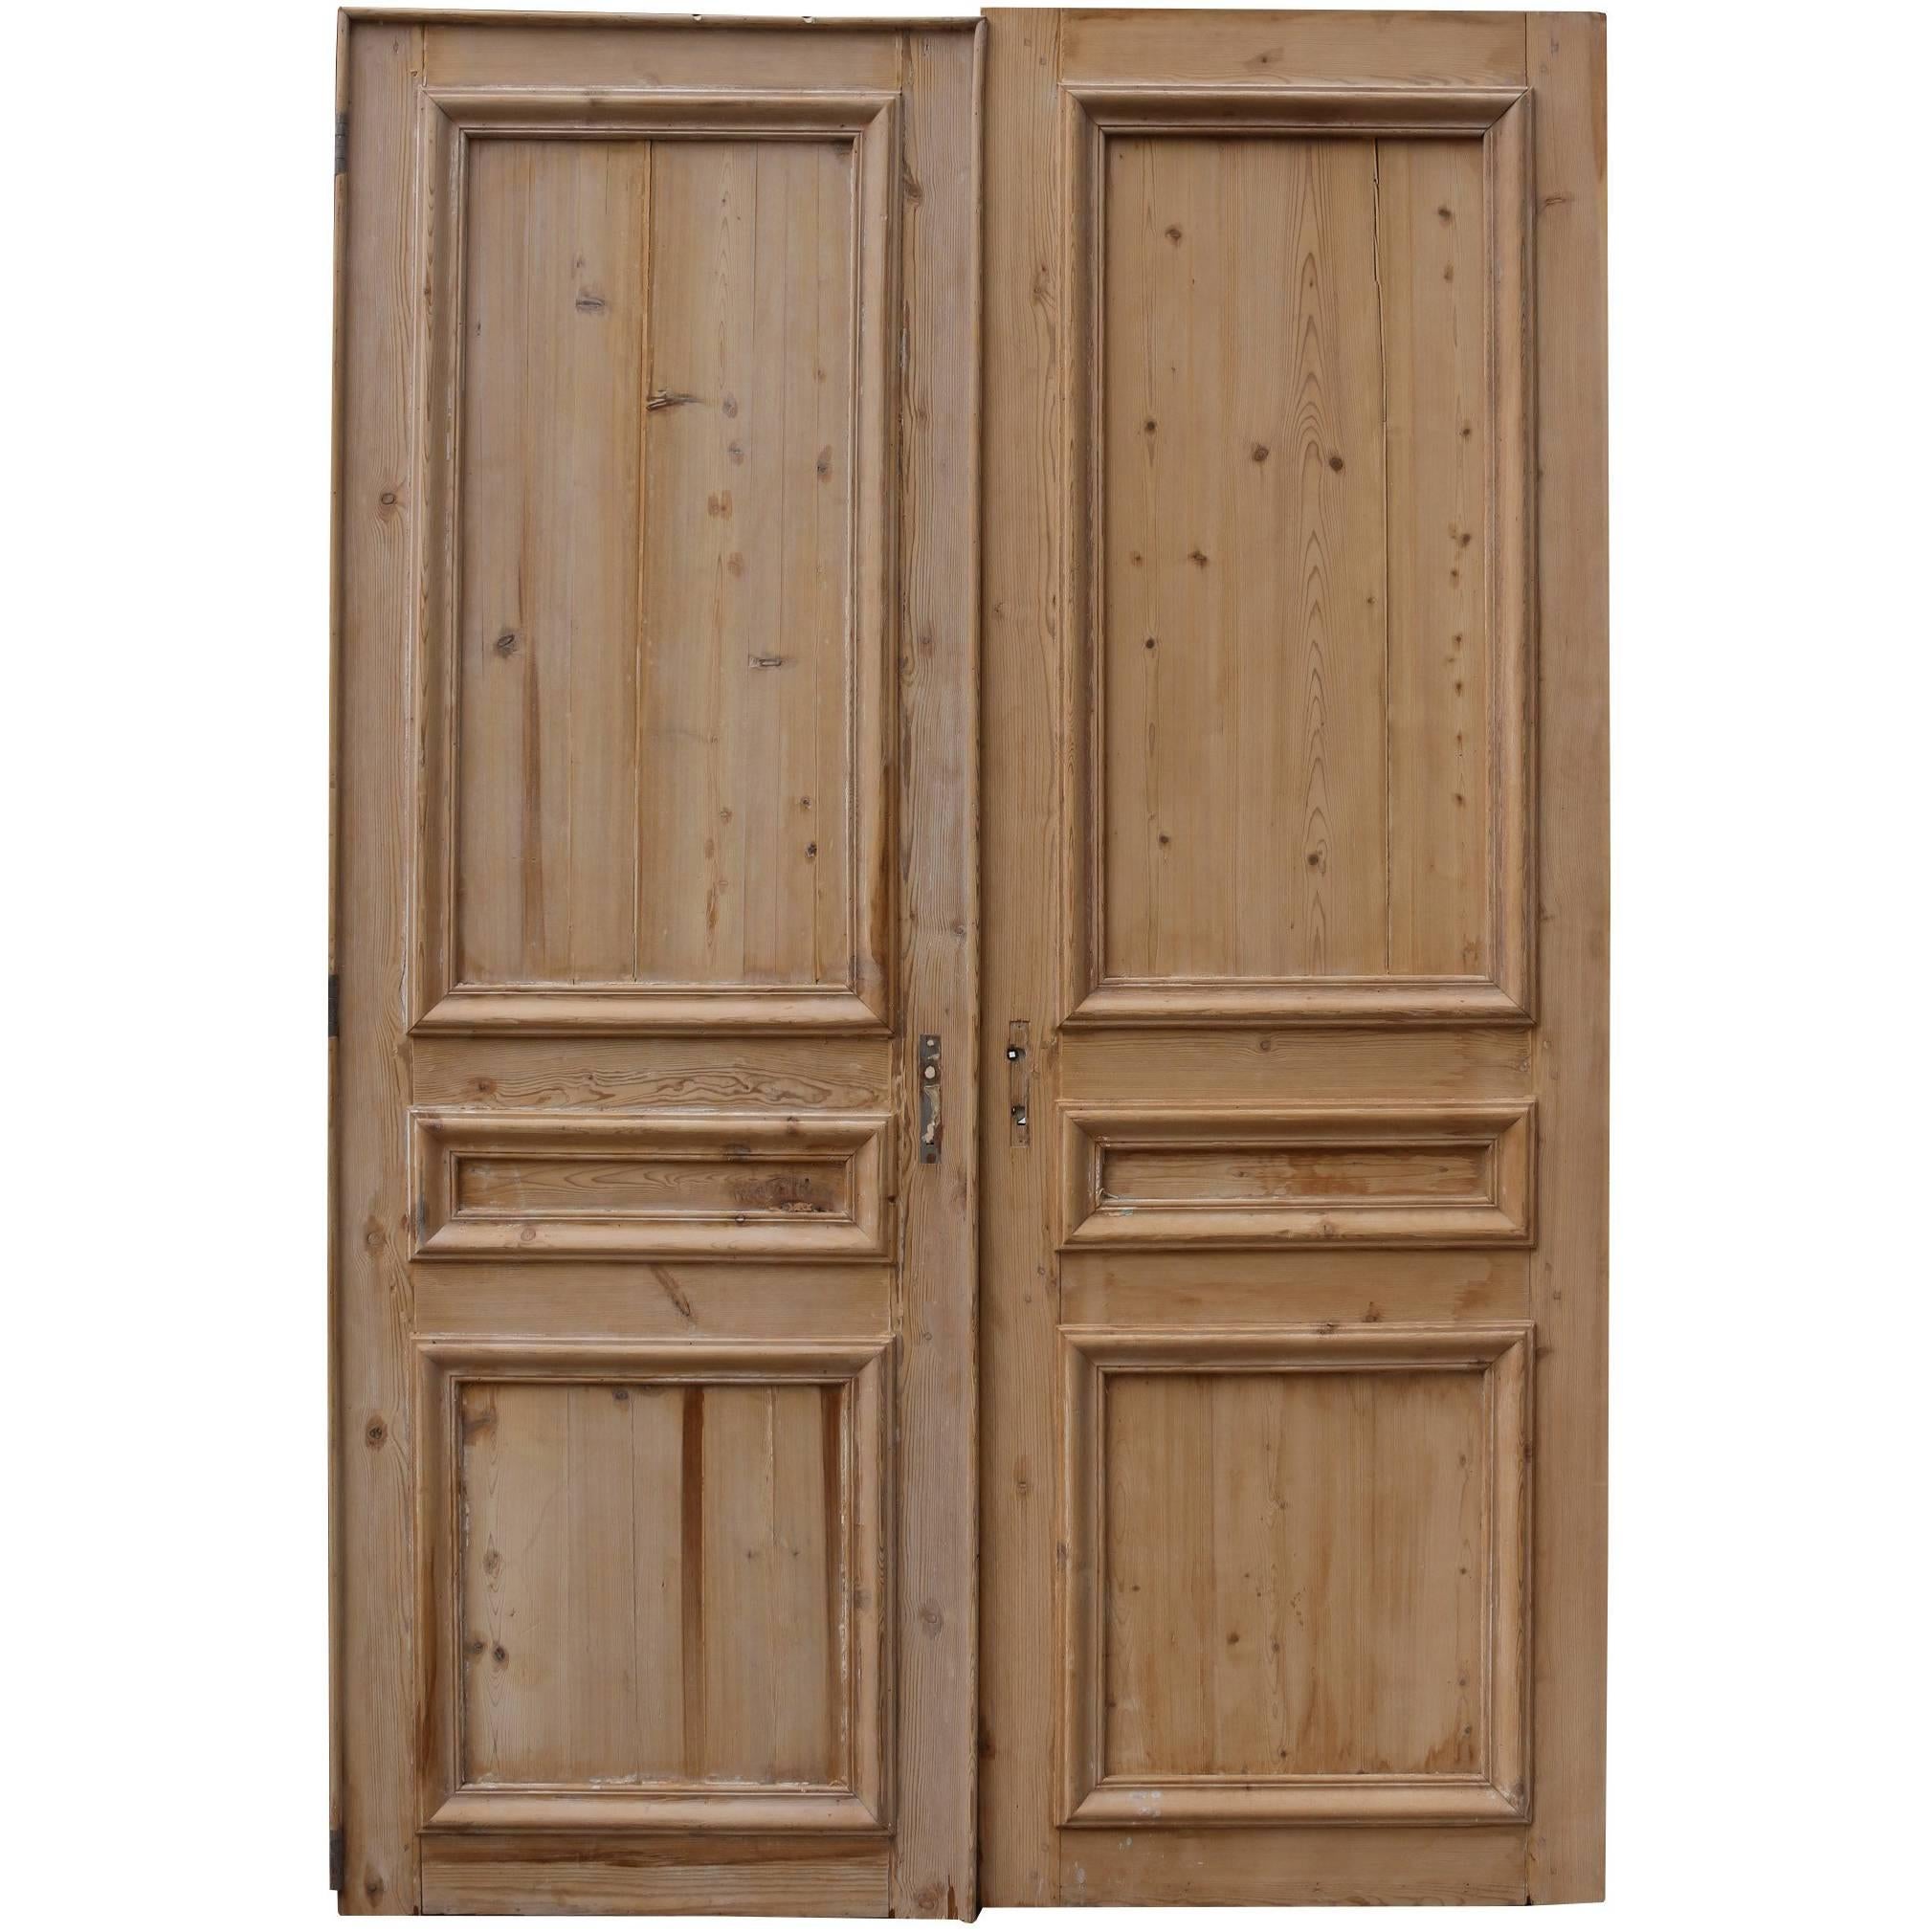 Pair of Antique Stripped Pine French Double Doors